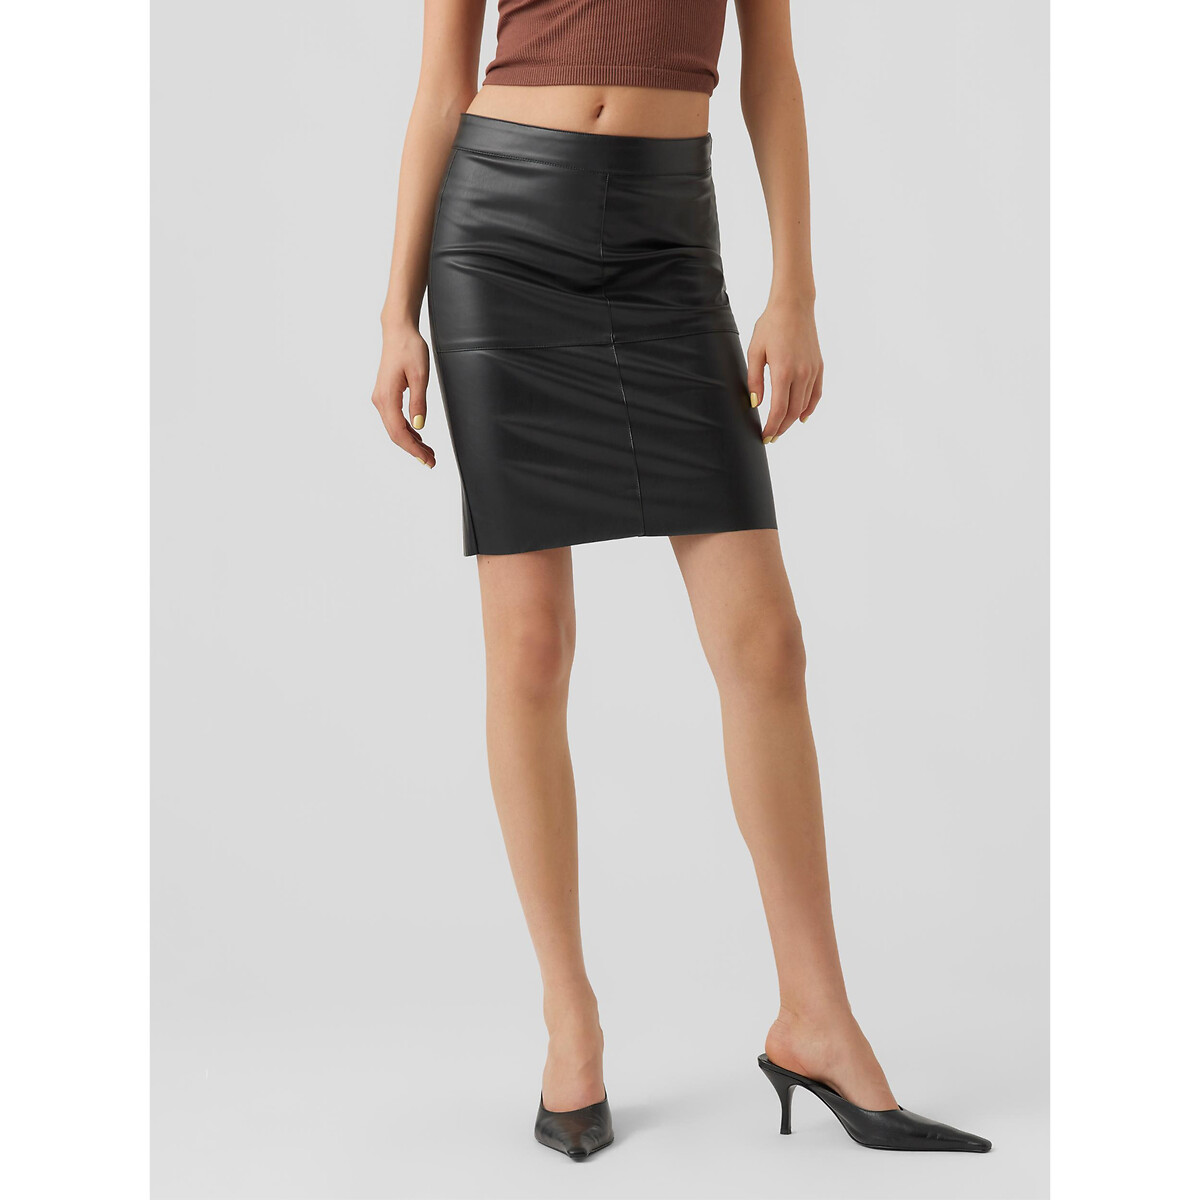 Image of Faux Leather Mini Skirt with High Waist